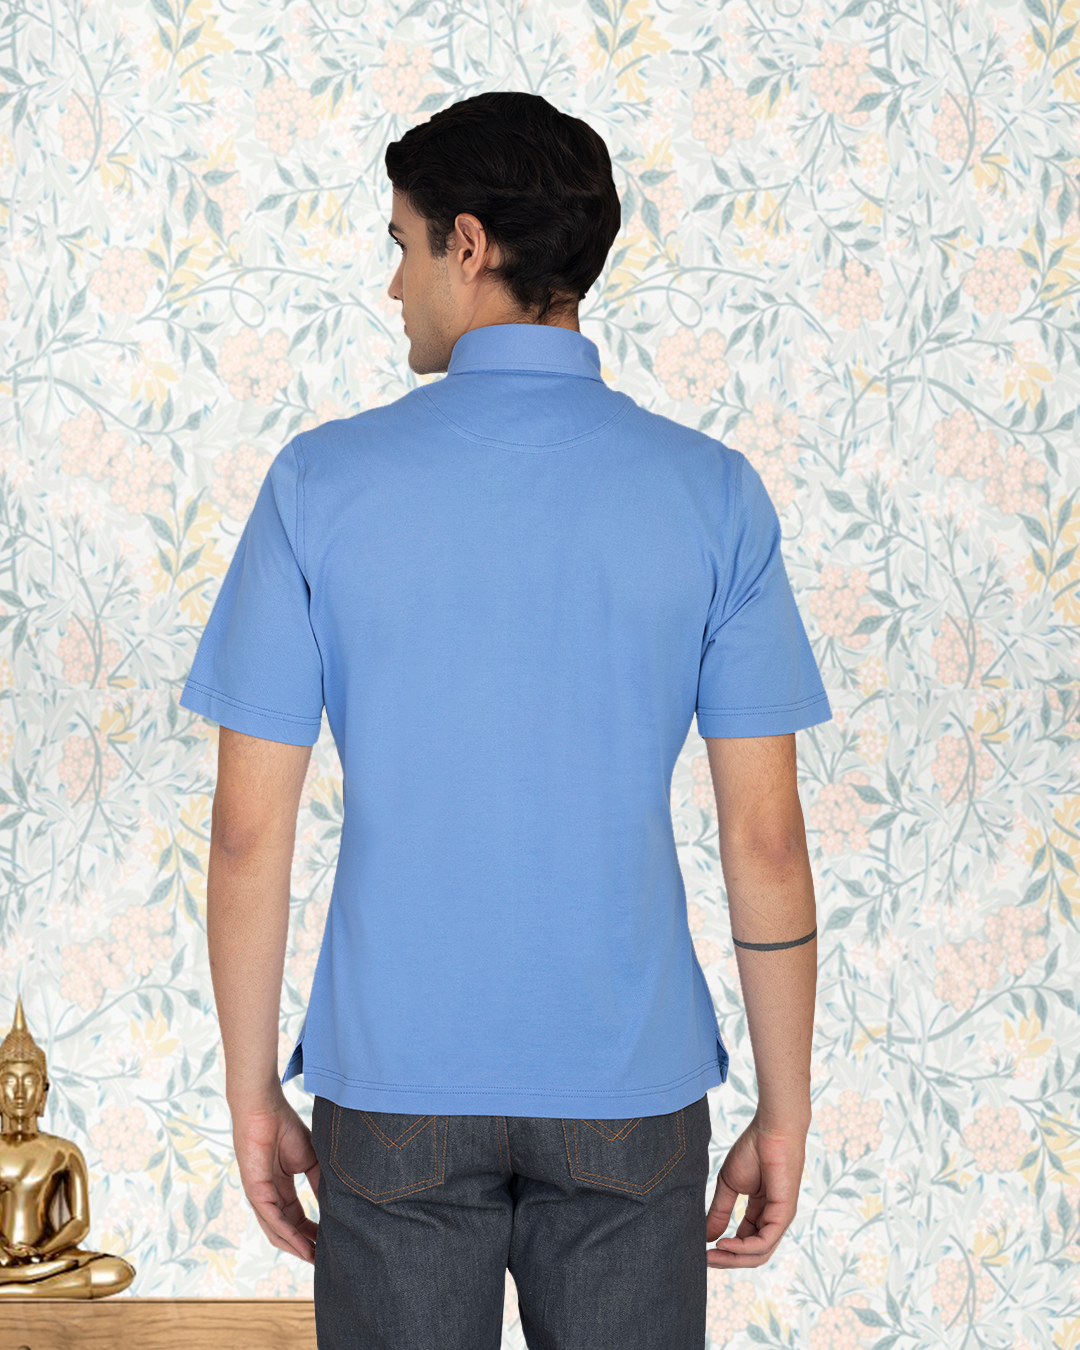 Back of model wearing the custom oxford polo shirt for men by Luxire in soft blue